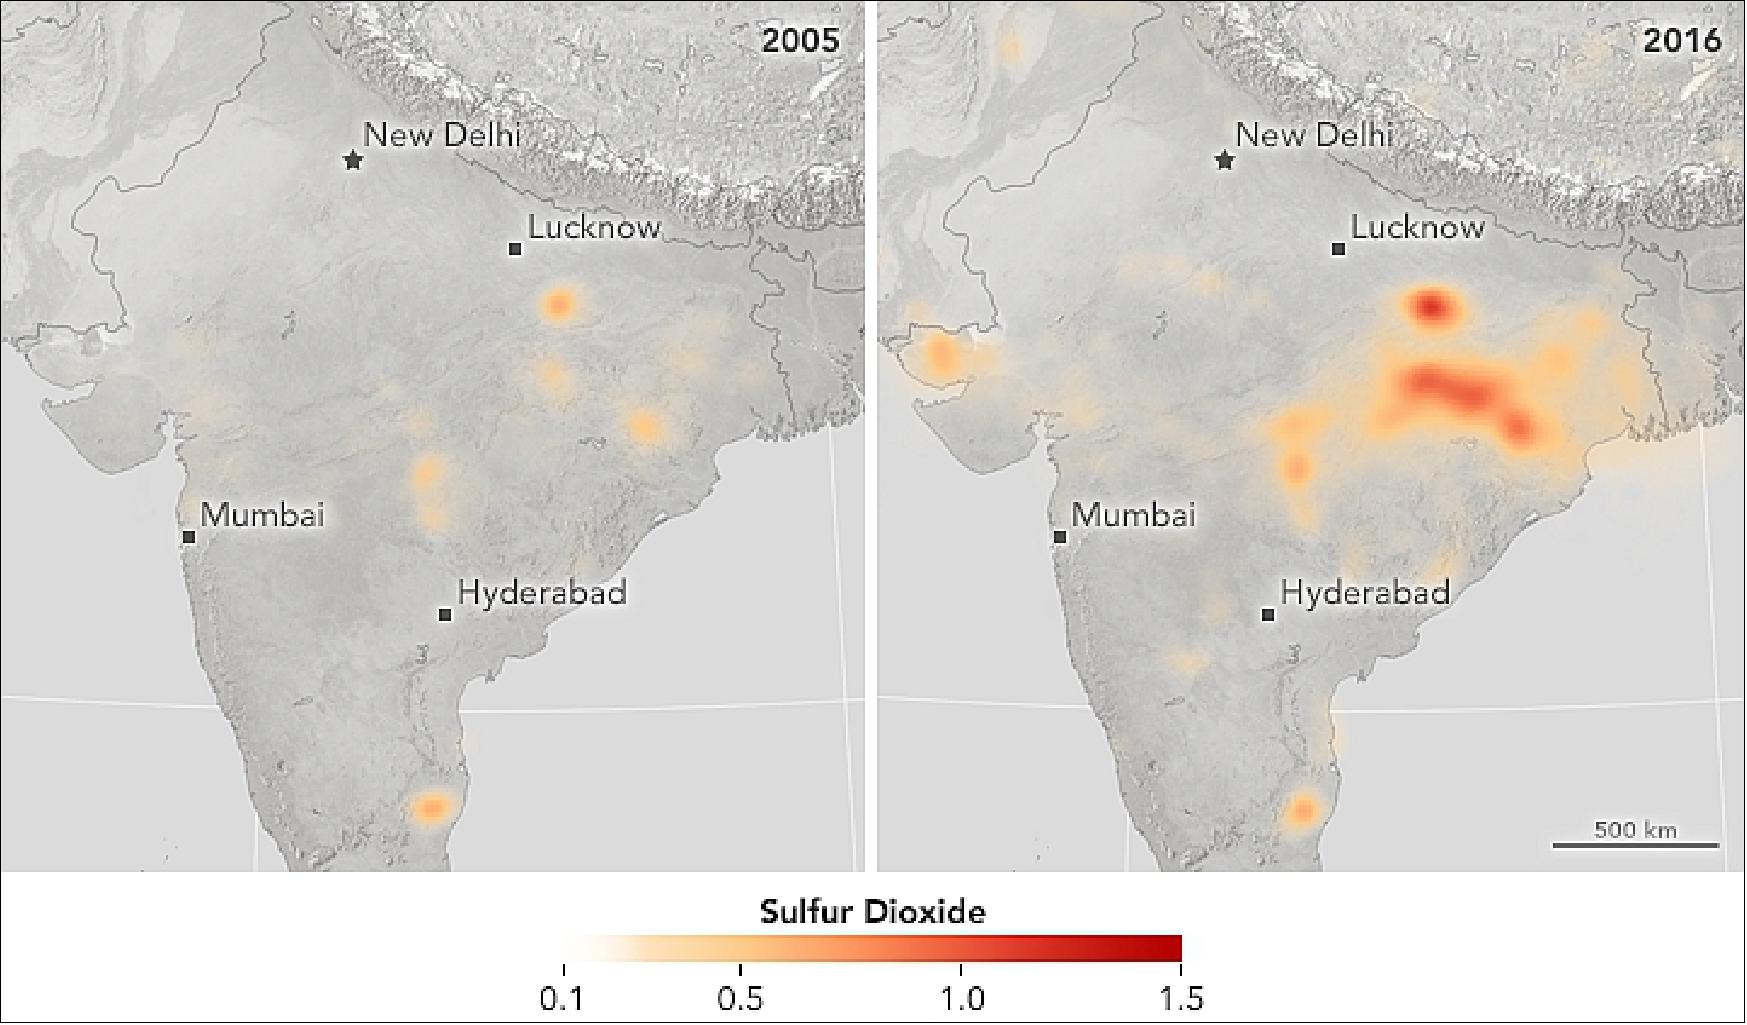 Figure 33: Changes in SO2 observations over India between 2005 and 2016 with OMI on Aura of NASA, expressed in Dobson Units (1 DU = 2.69 x 1016 molecules cm-2). The values are yearly averages of SO2 concentrations [image credit: NASA Earth Observatory, images by Jesse Allen, using OMI data courtesy of Chris McLinden (Environment Canada), story by Irene Ying (University of Maryland), with Mike Carlowicz (NASA Earth Observatory)]